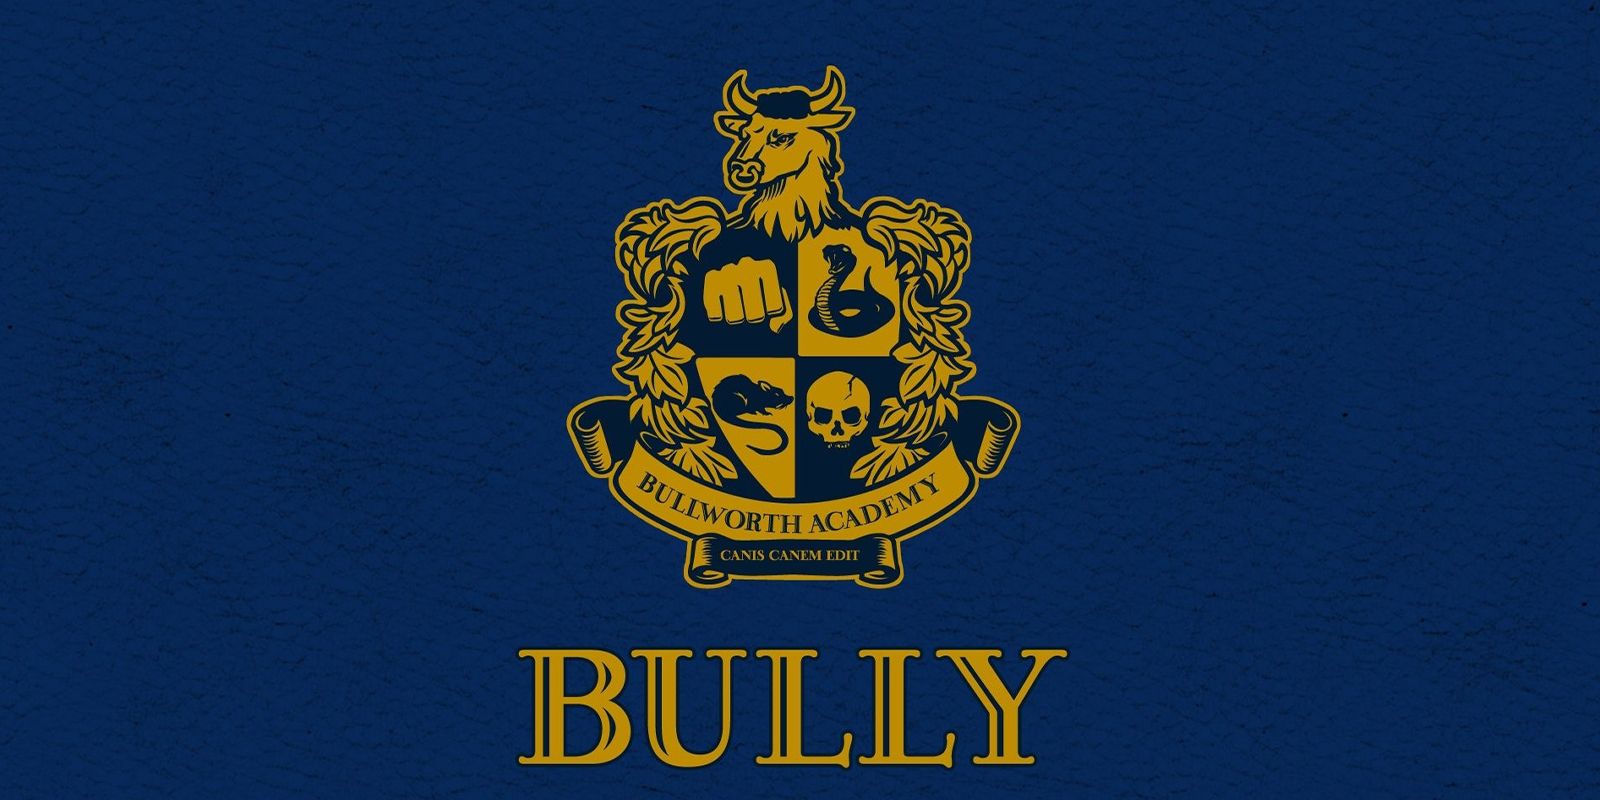 The logo from the Rockstar game Bully 